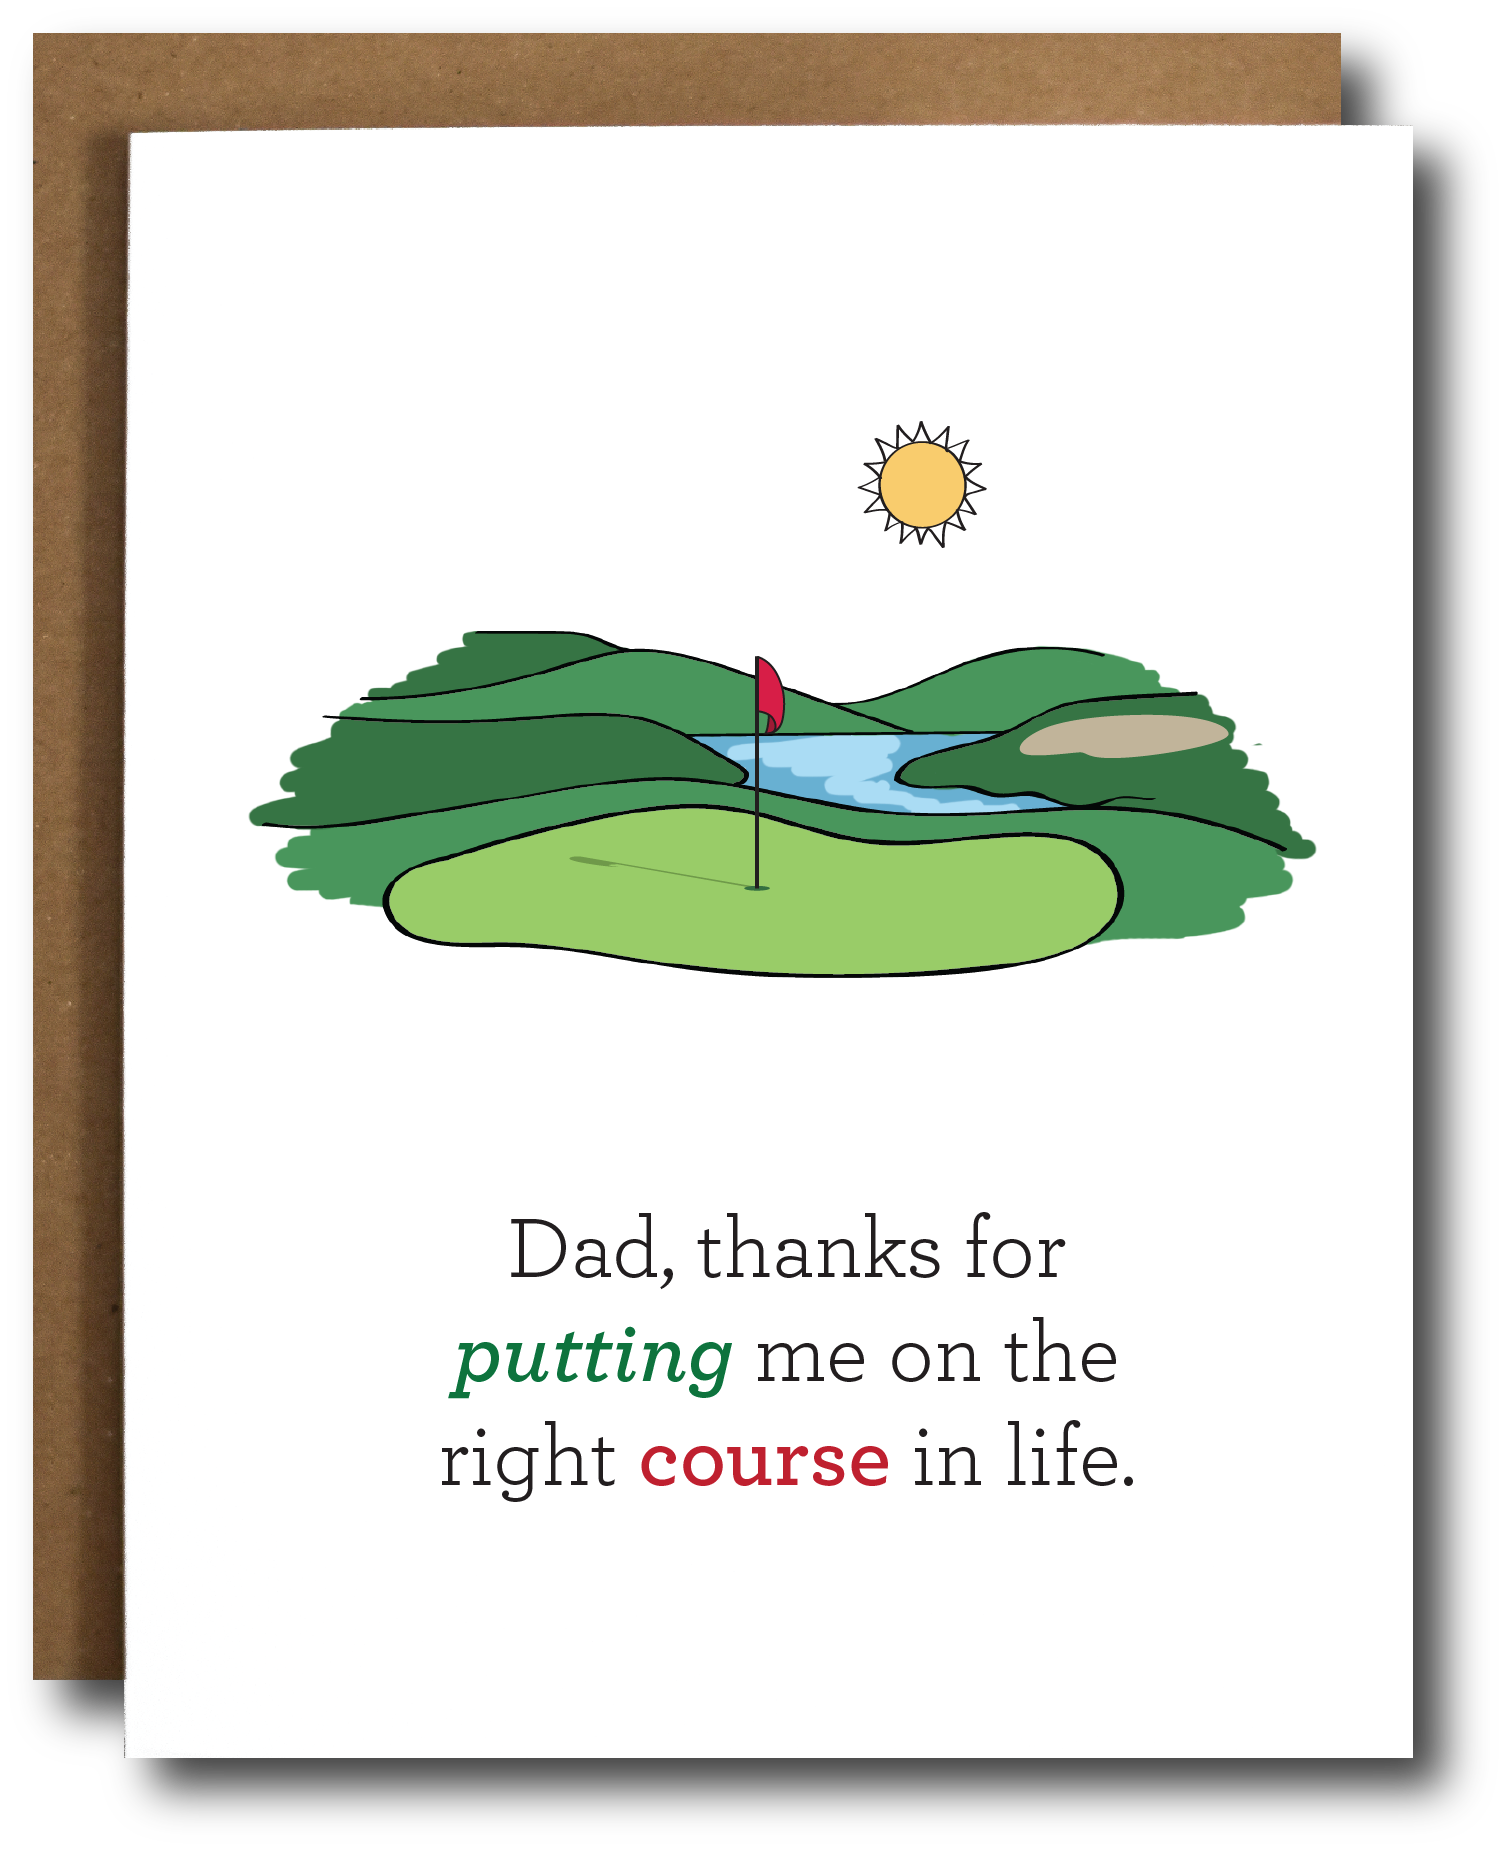 golf-card-happy-fathers-day-fathers-day-happy-father